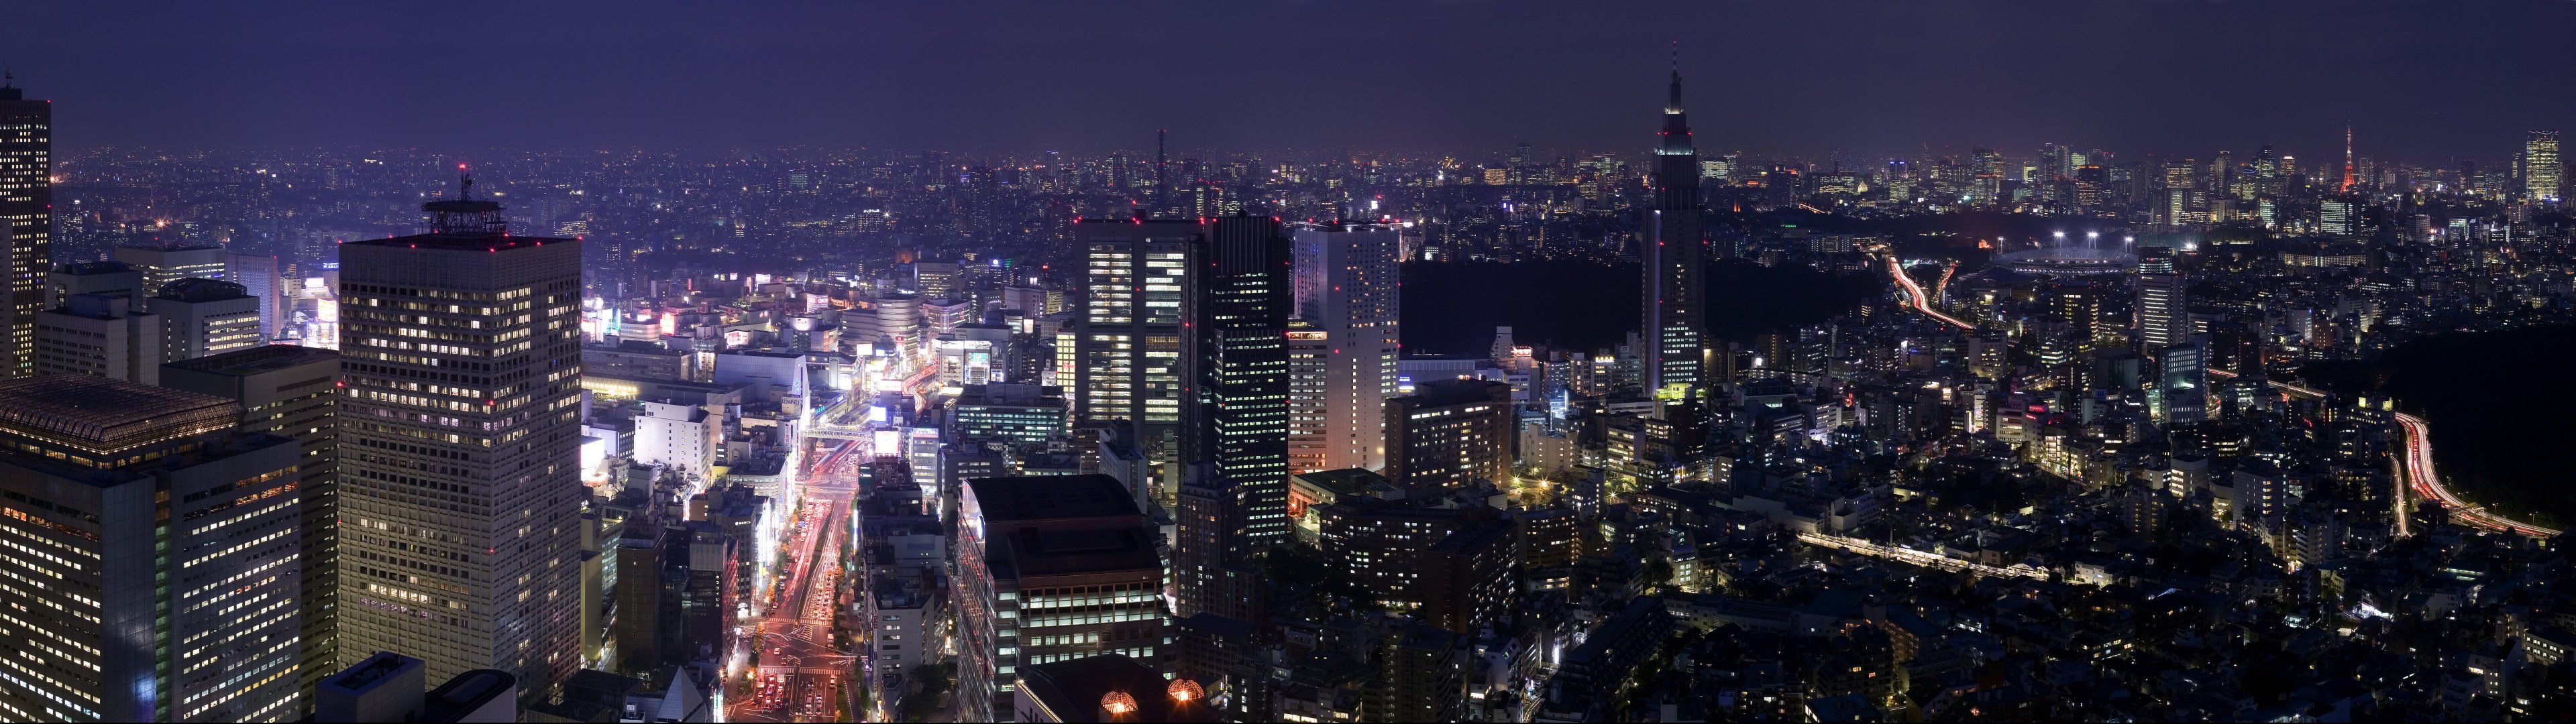 Cityscapes night buildings city skyline wallpaper | 3840x1080 ...